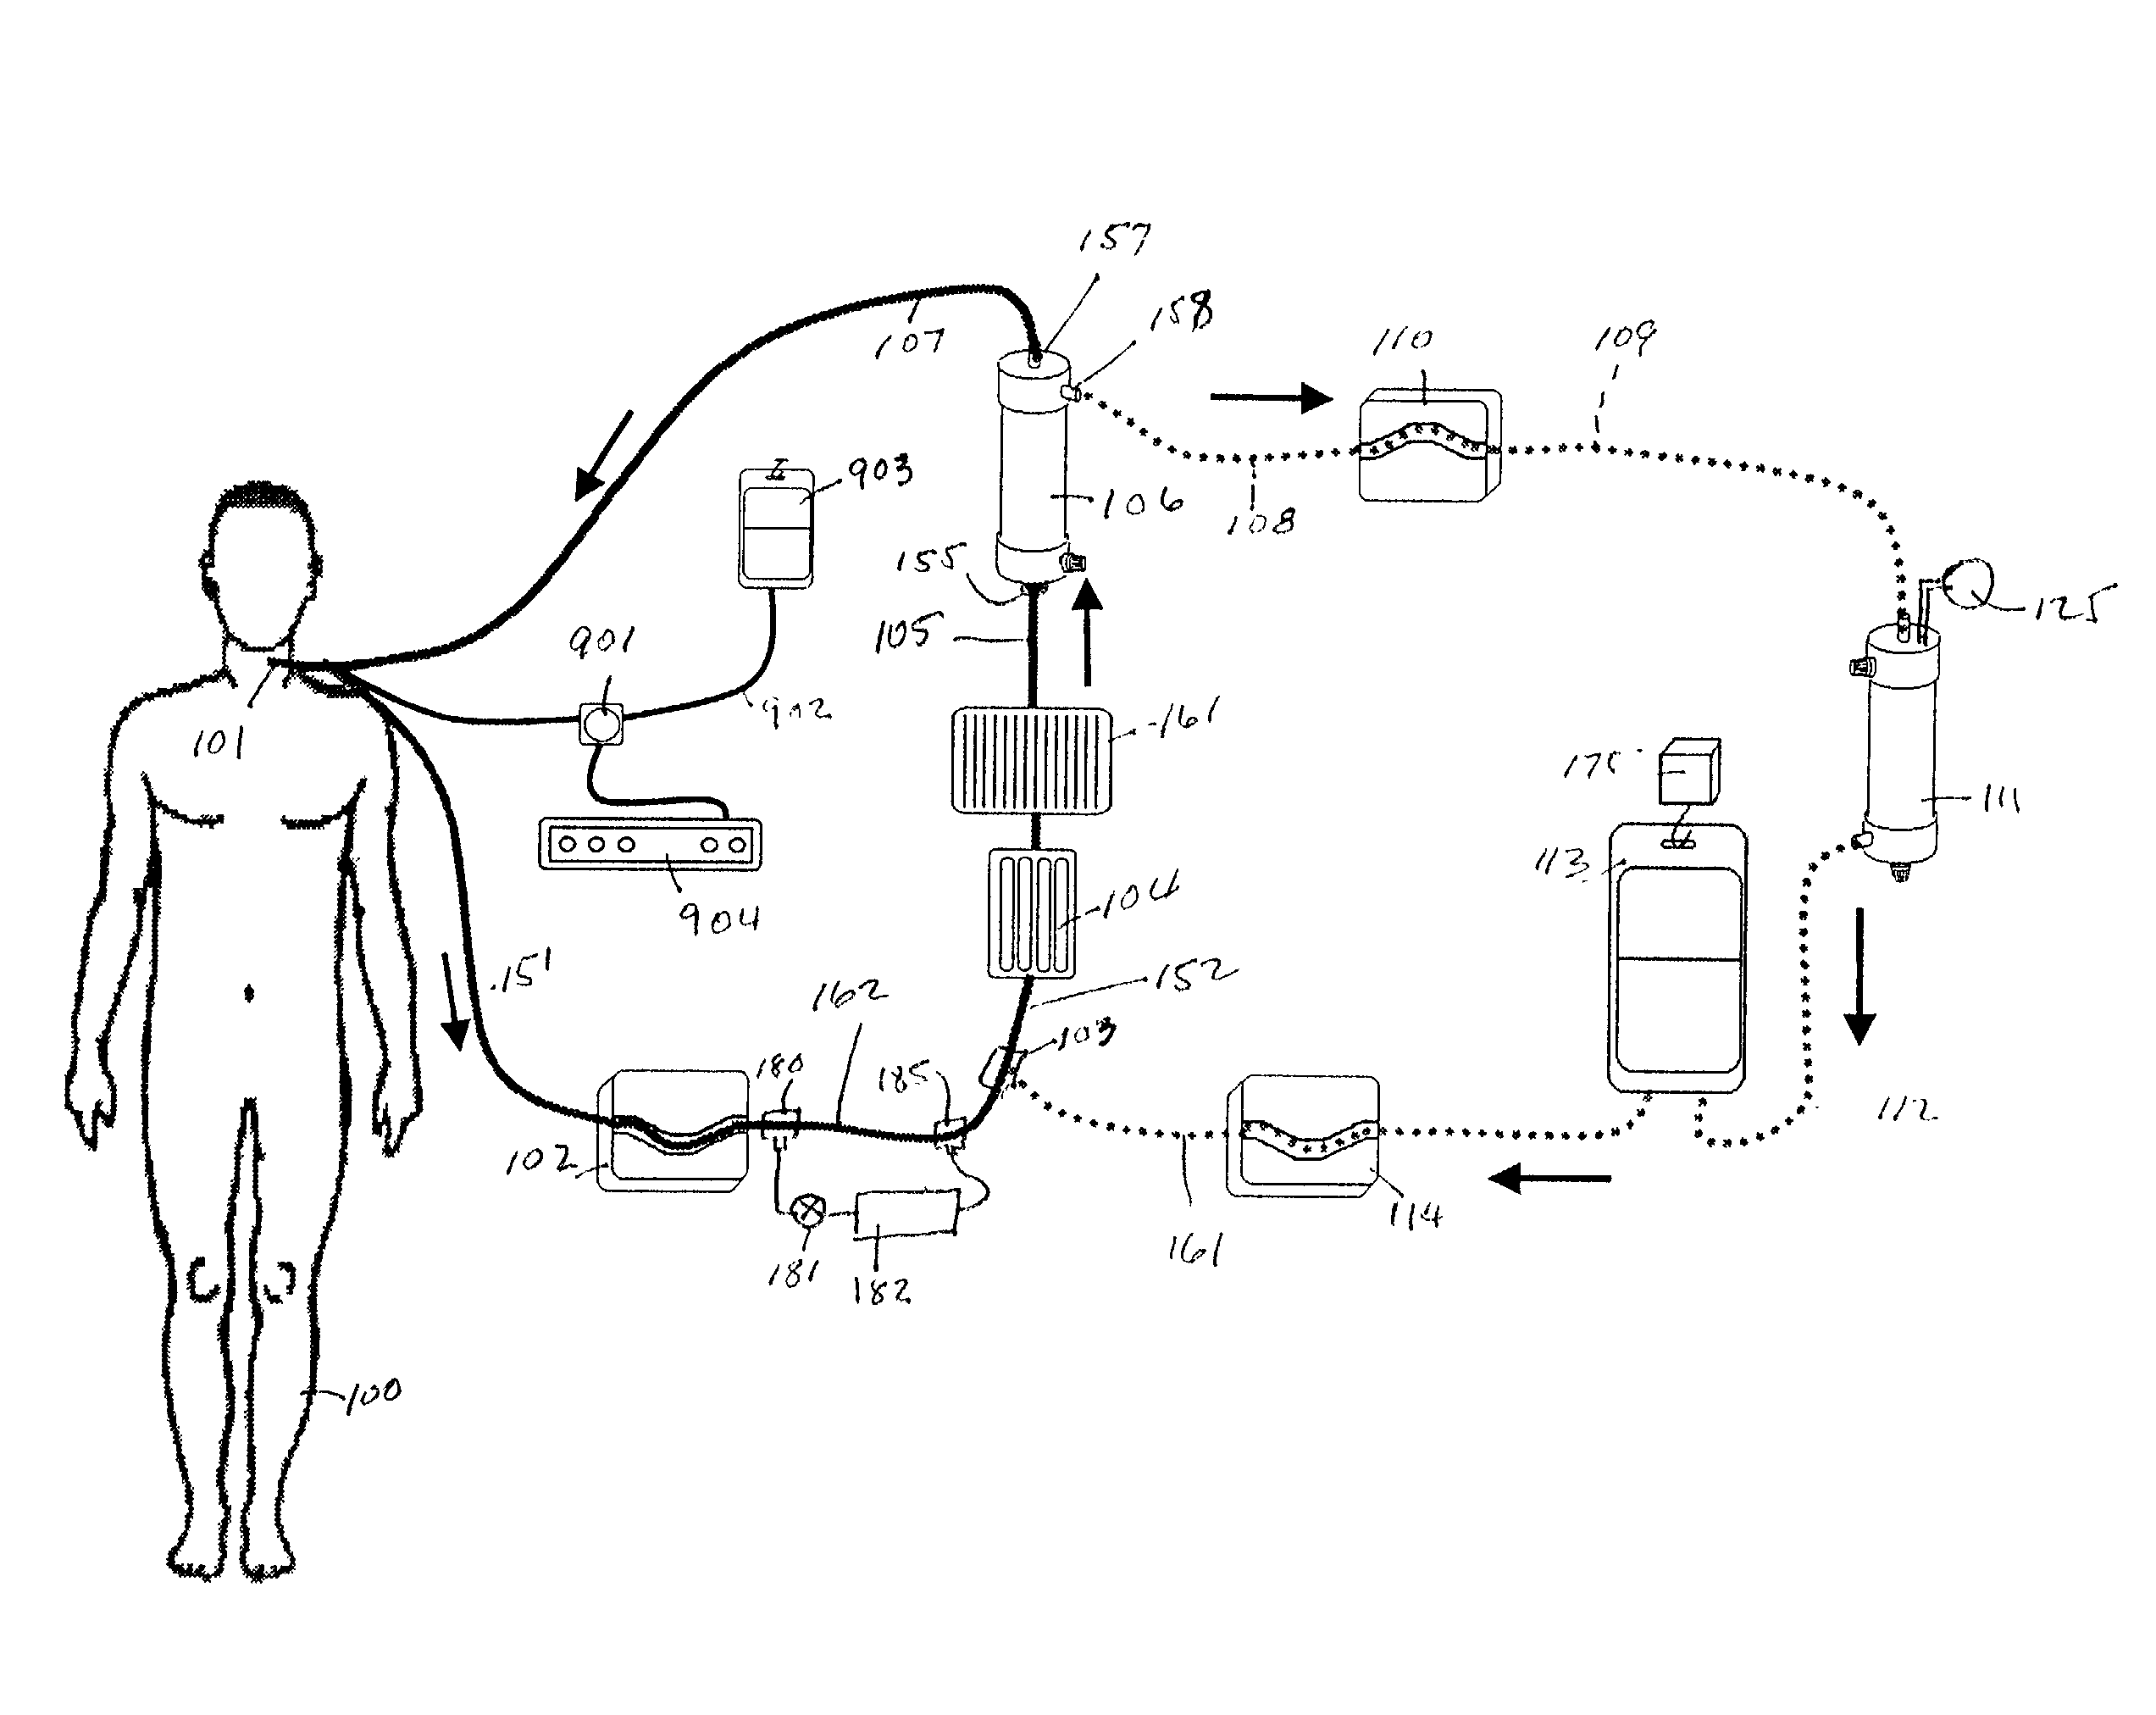 Simplified cerebral retroperfusion apparatus and method